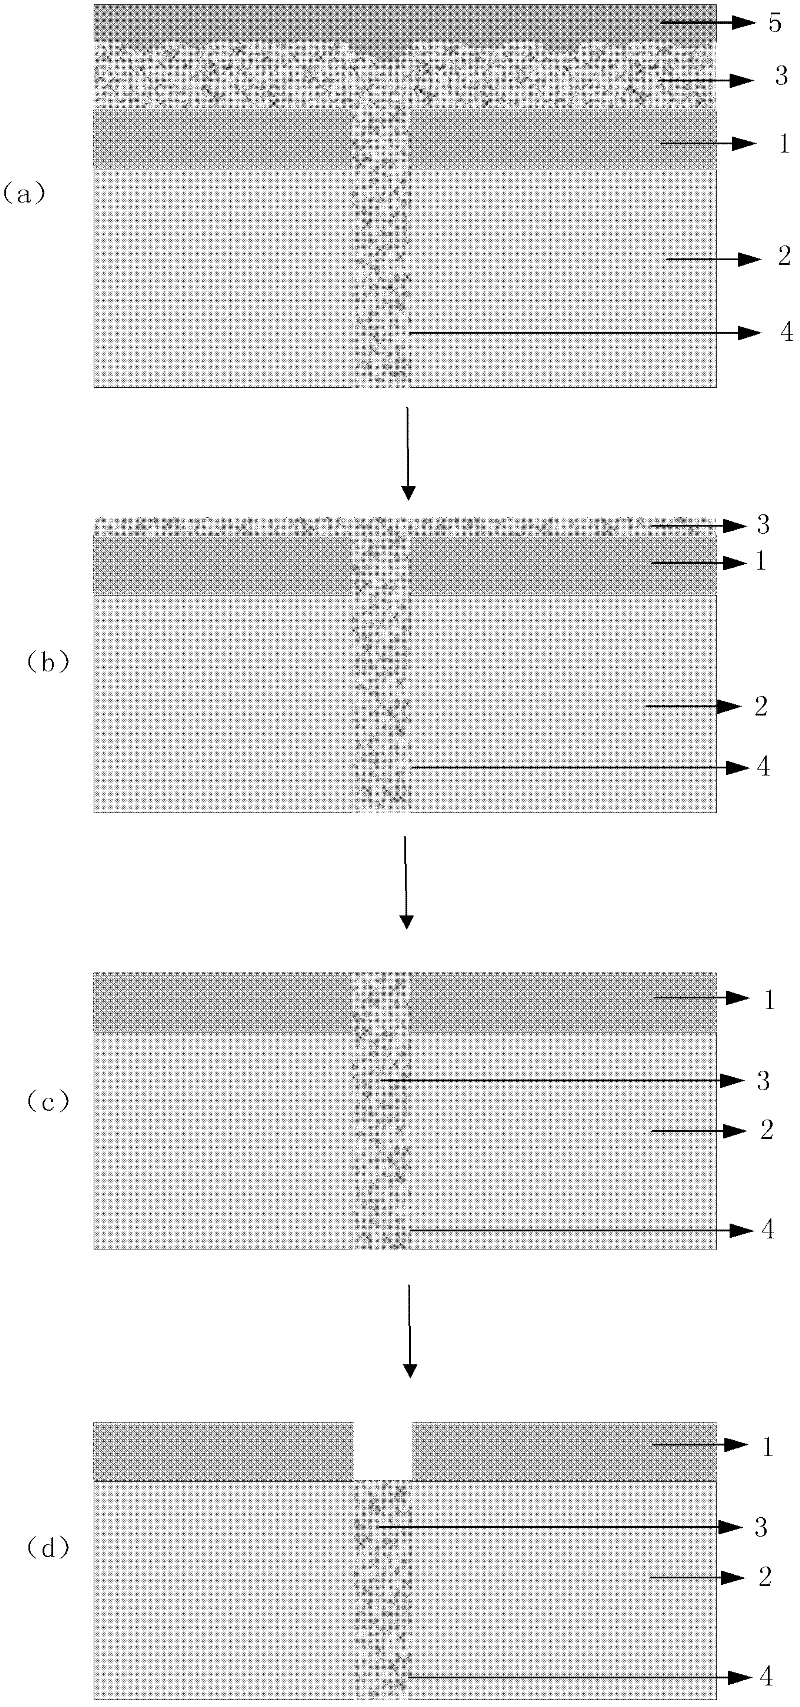 Technological method for planarization of radio frequency LDMOS polysilicon channel